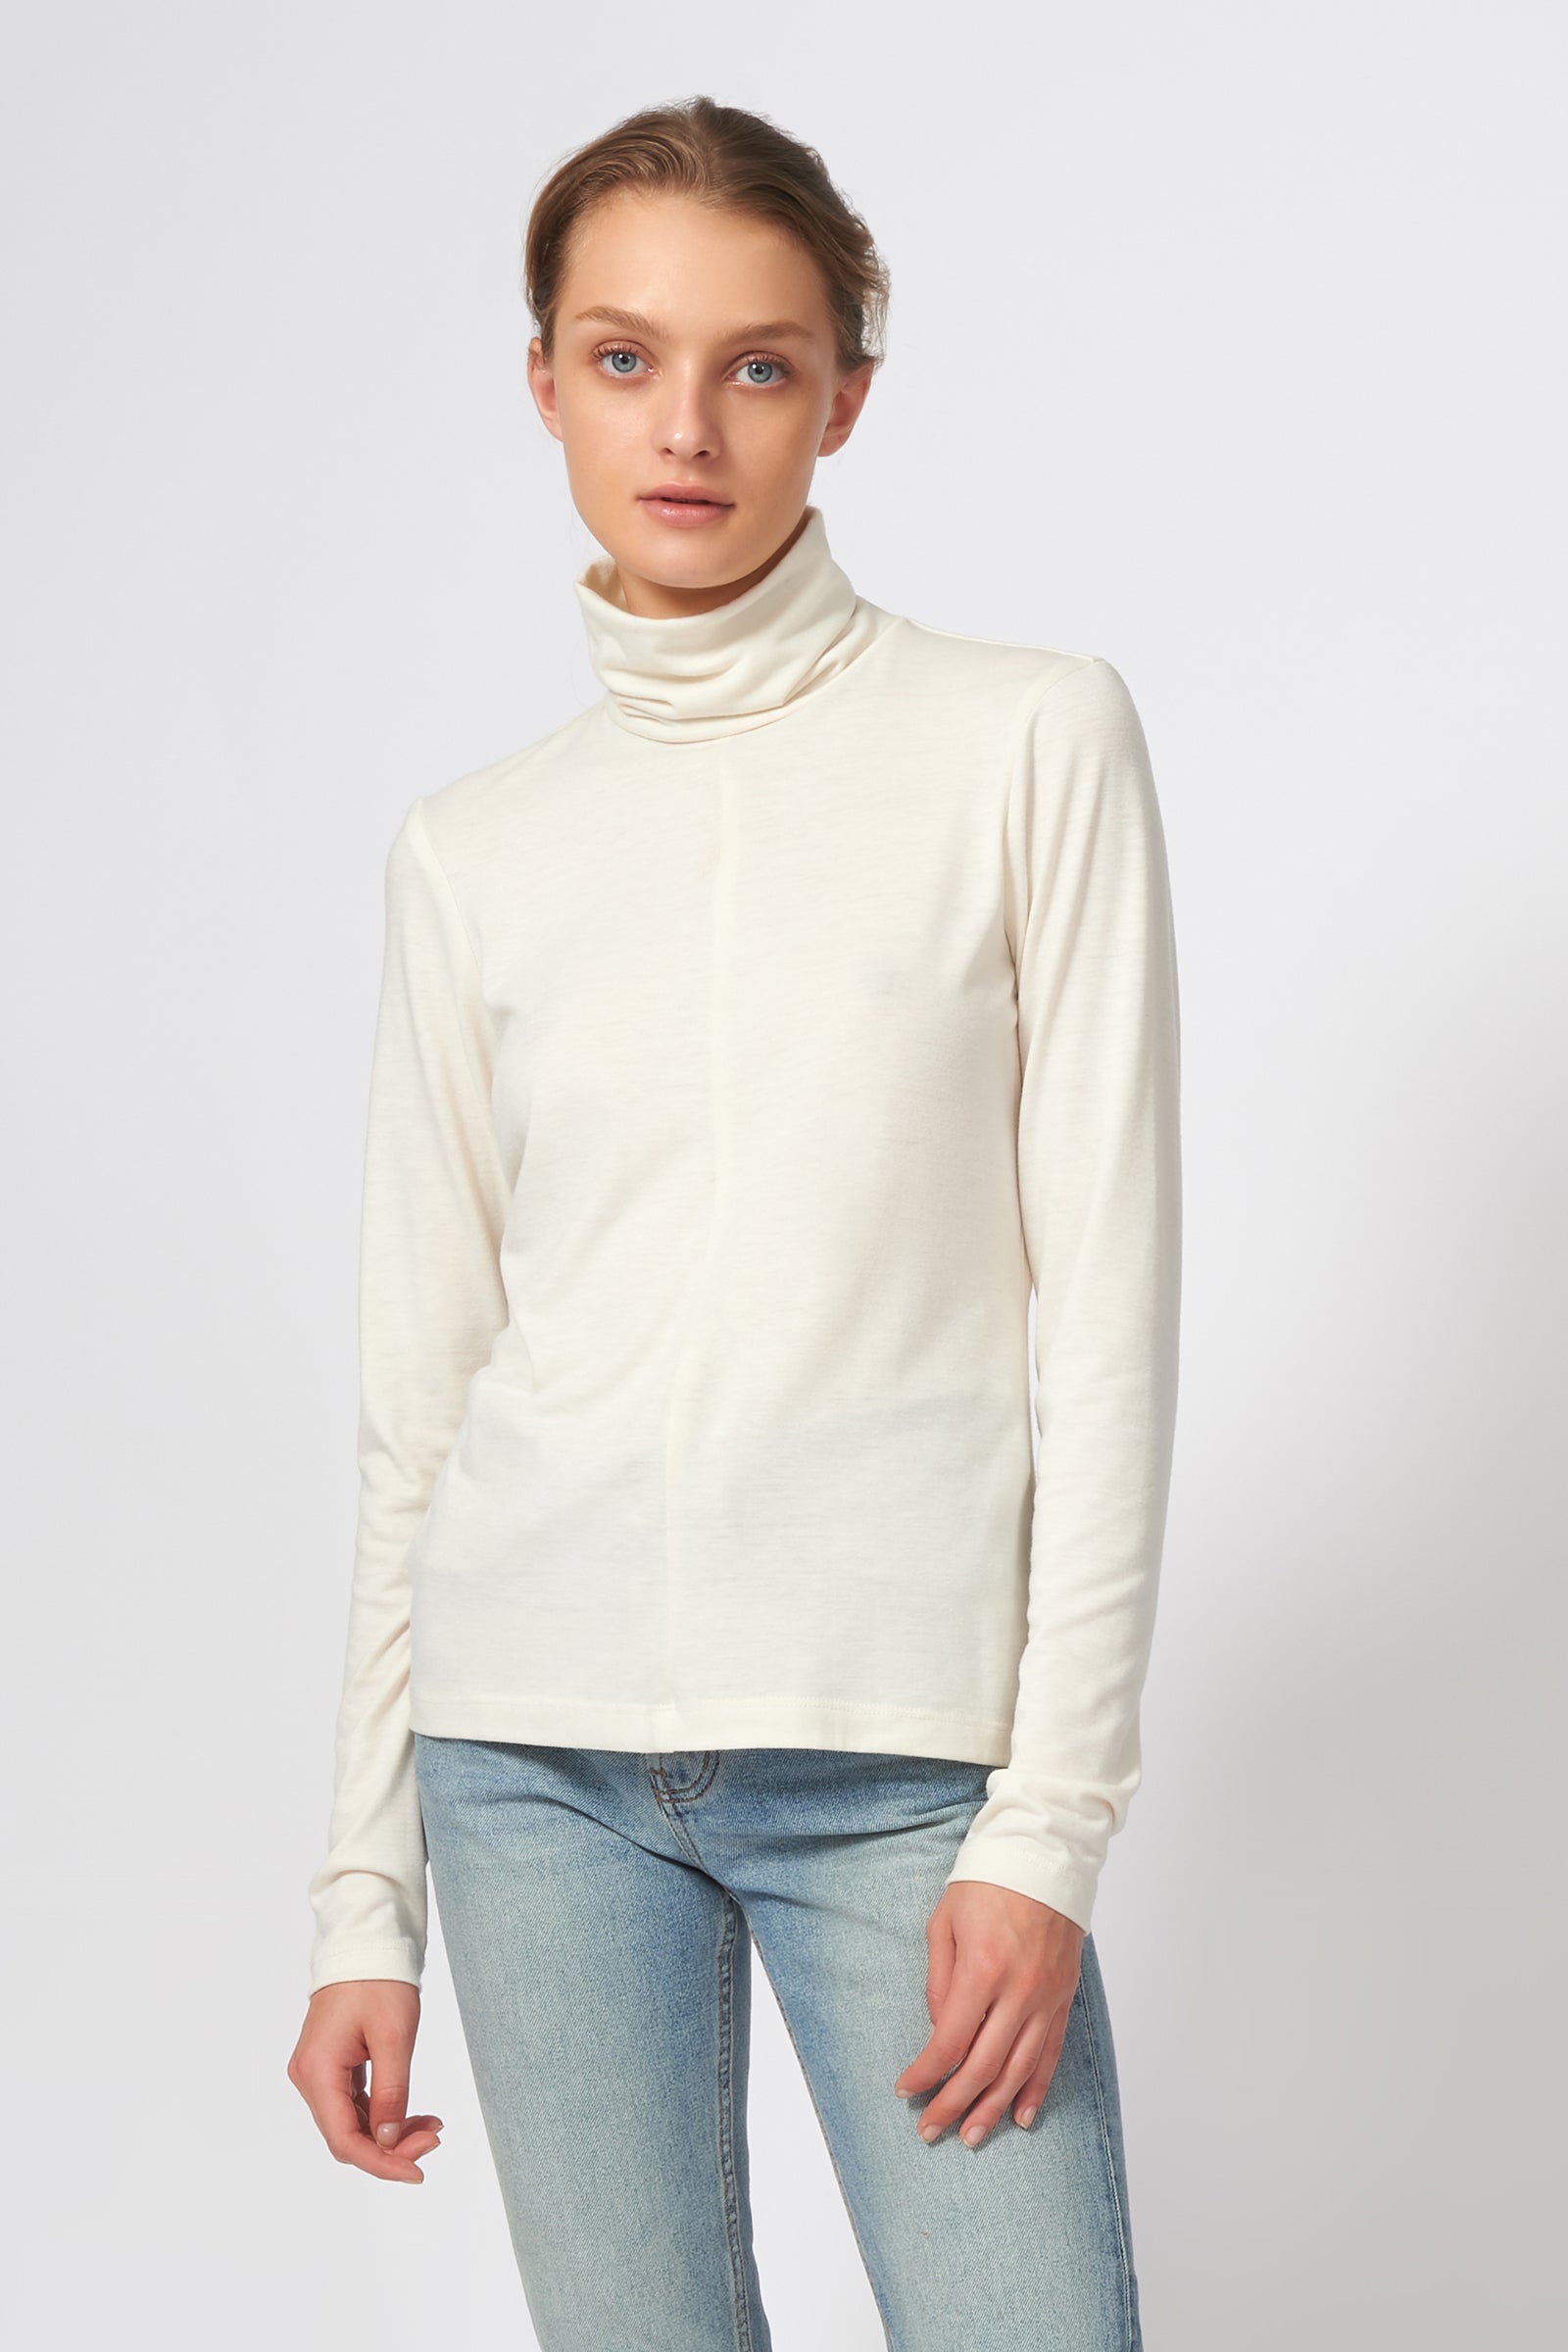 Kal Rieman Seamed Turtleneck in Ivory on Model Front View